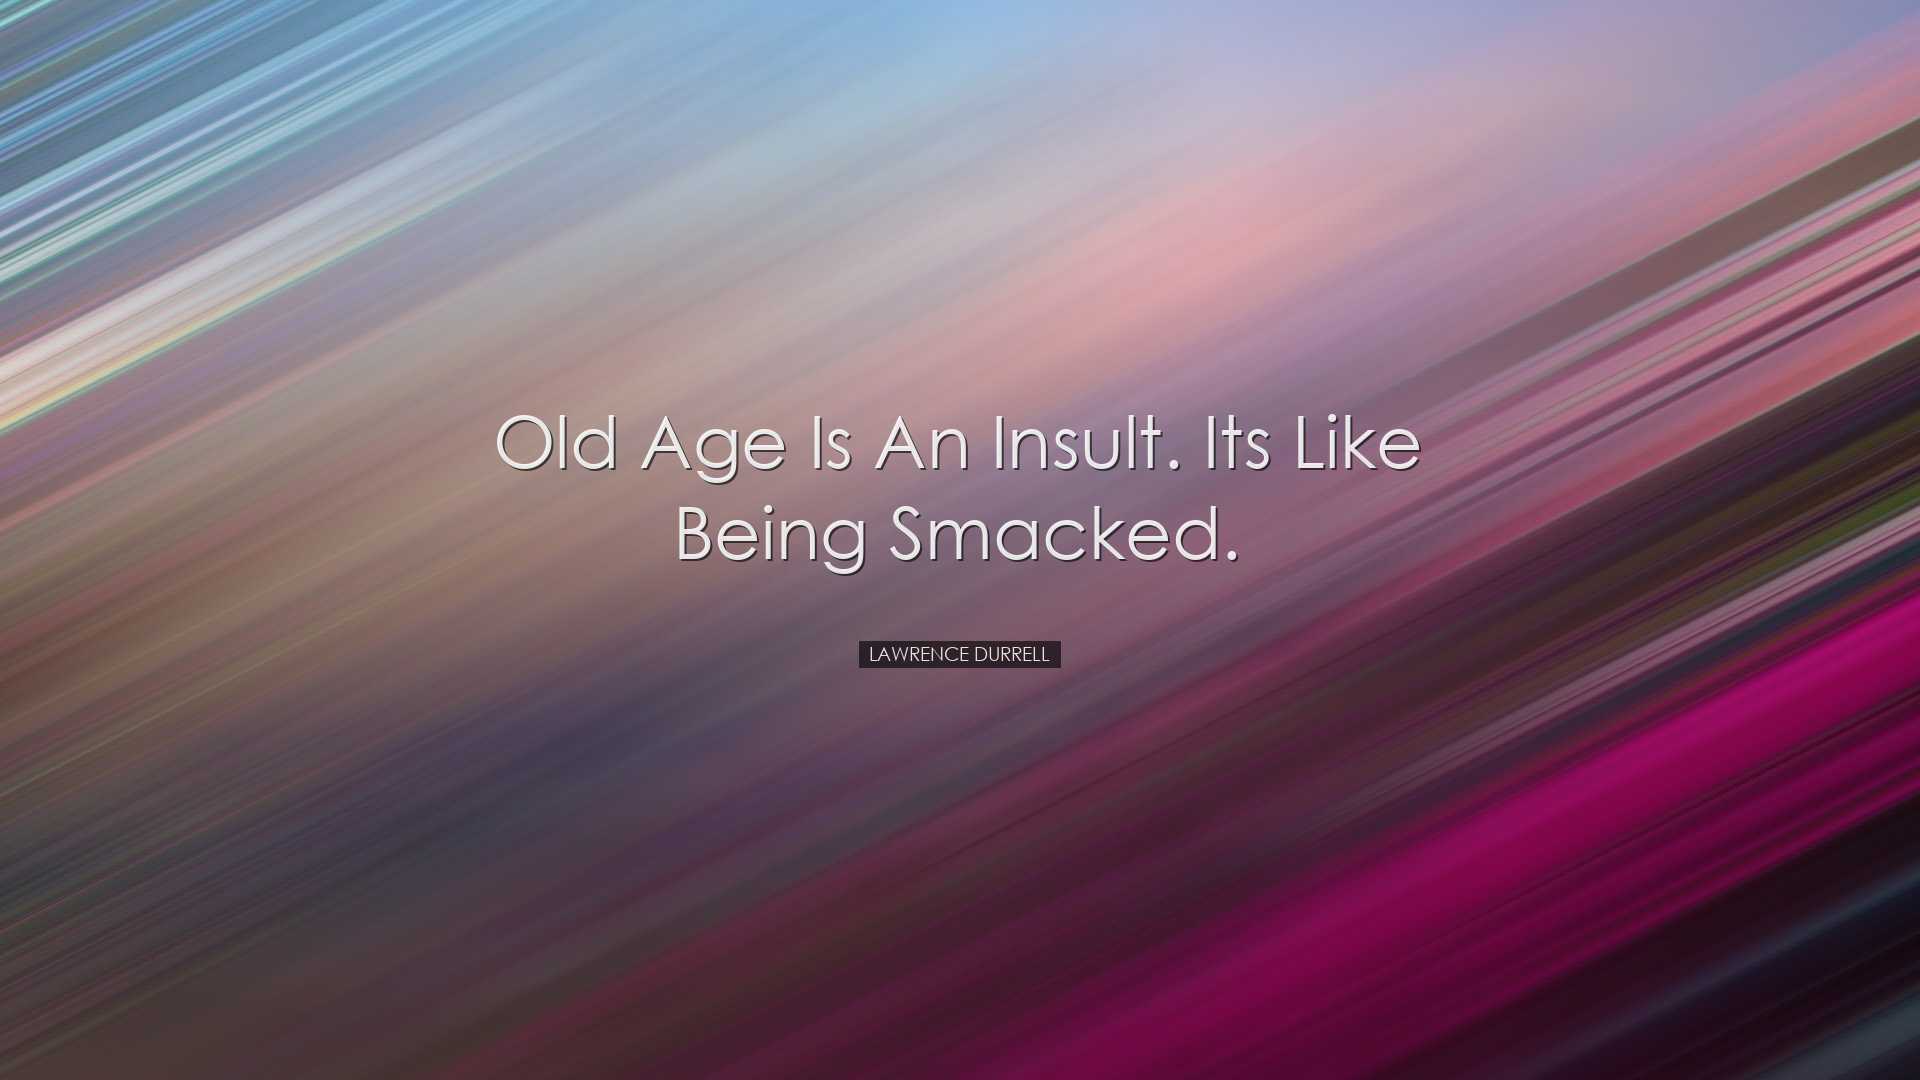 Old age is an insult. Its like being smacked. - Lawrence Durrell